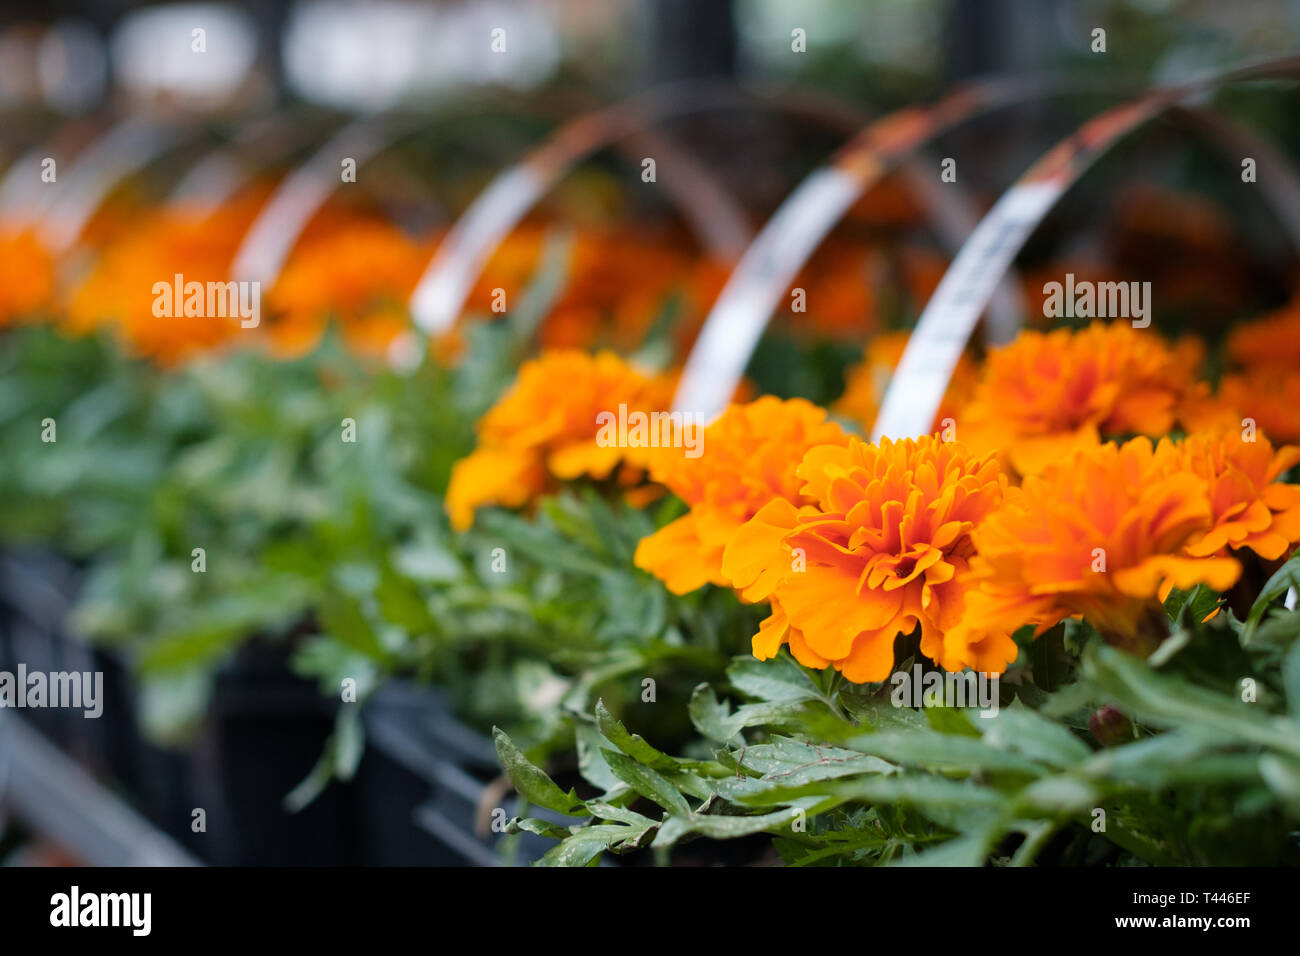 Garden shop. Many colorful flowerpot in the store, close up. Nursery of plants and flowers for gardening Stock Photo